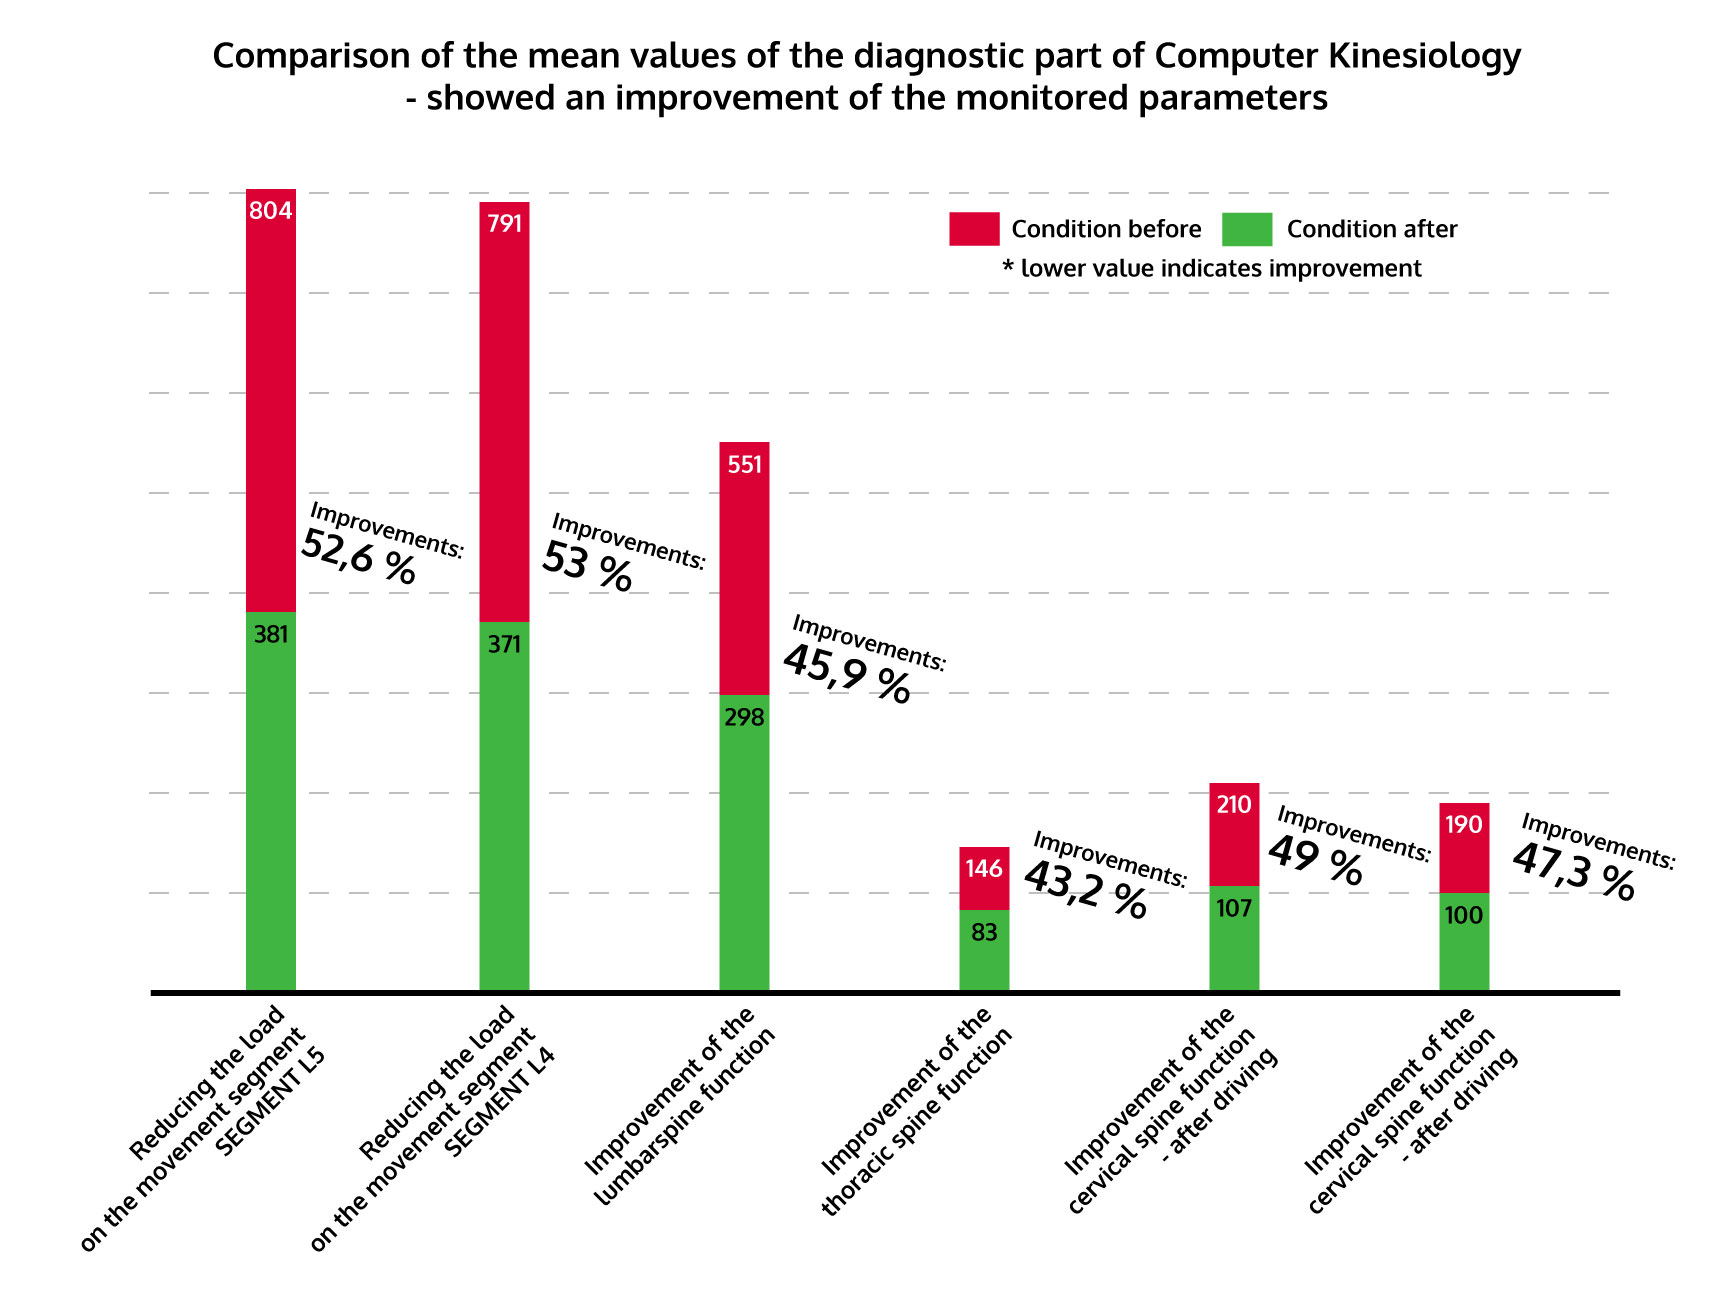 Comparison of the mean values of the diagnostic part of Computer Kinesiology - showed an improvement of the monitored parameters